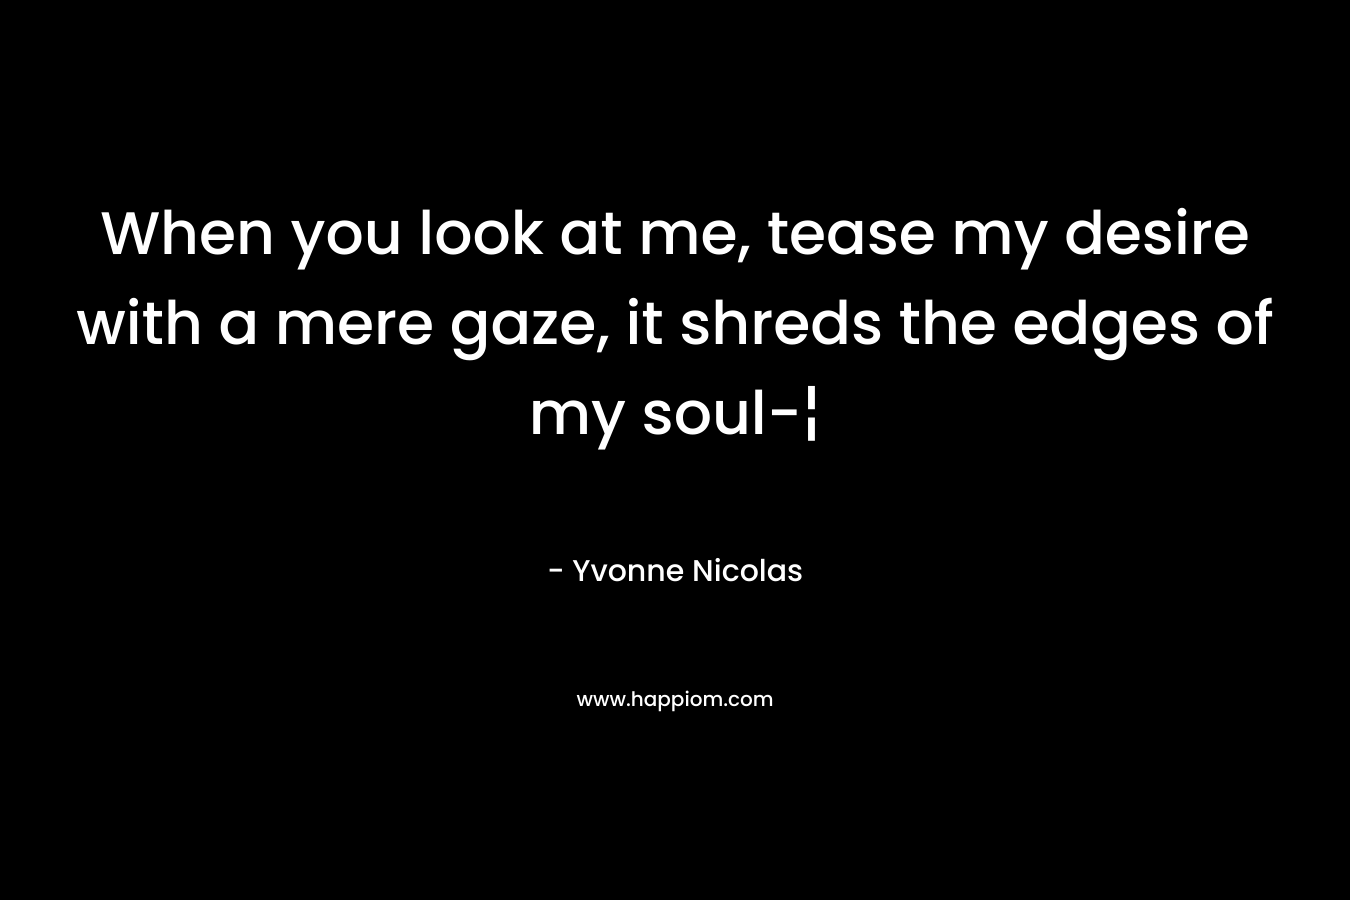 When you look at me, tease my desire with a mere gaze, it shreds the edges of my soul-¦